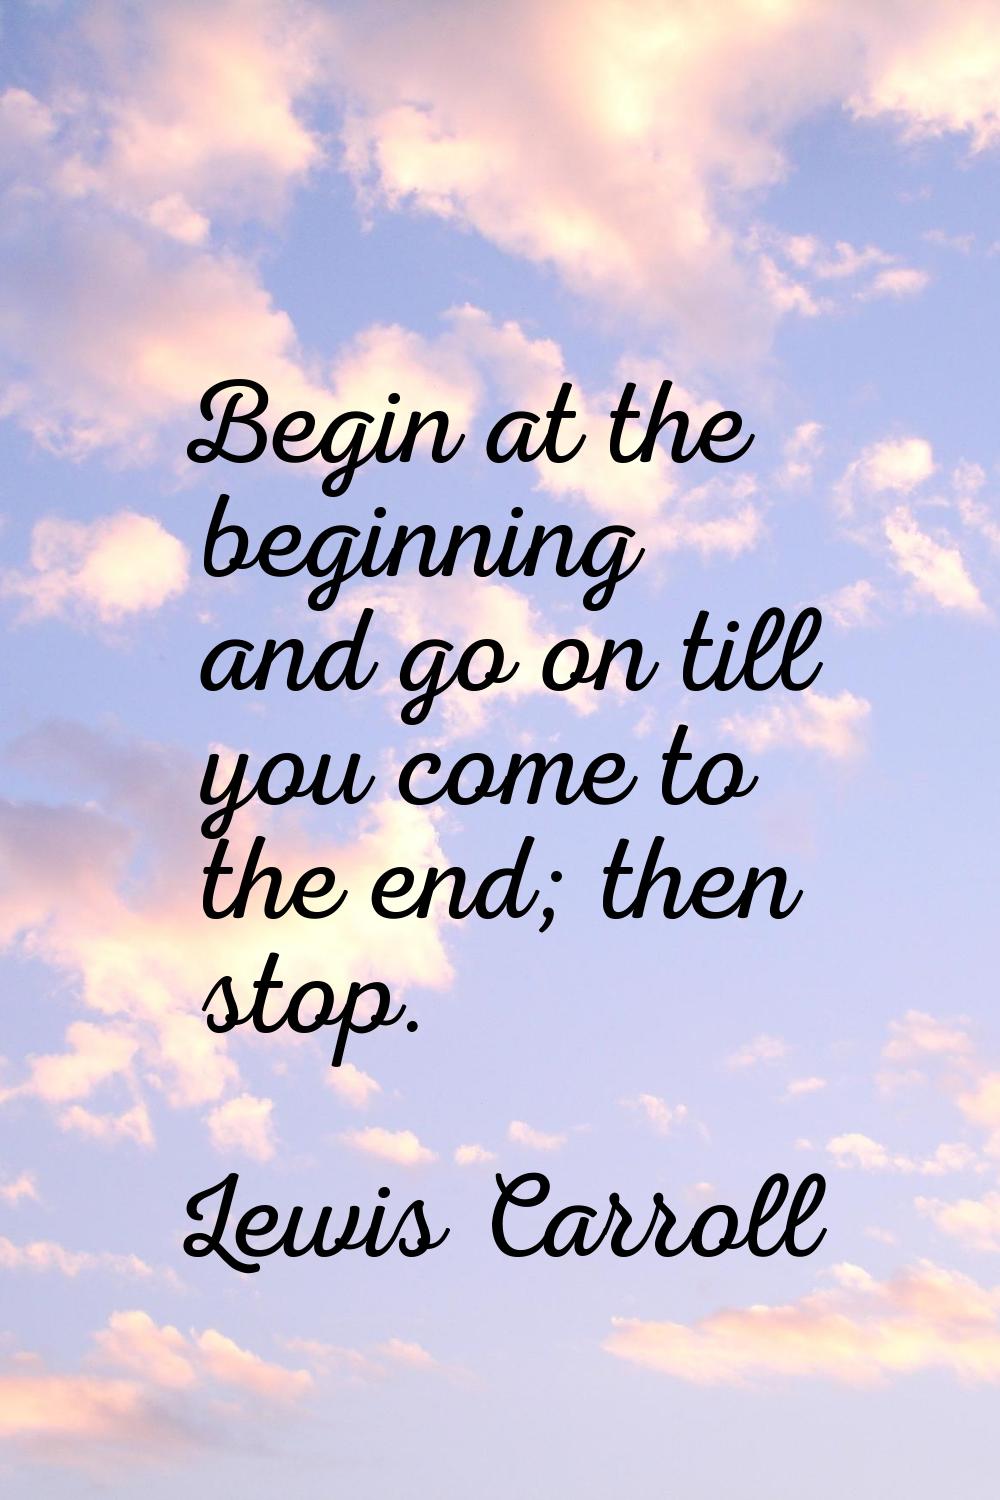 Begin at the beginning and go on till you come to the end; then stop.